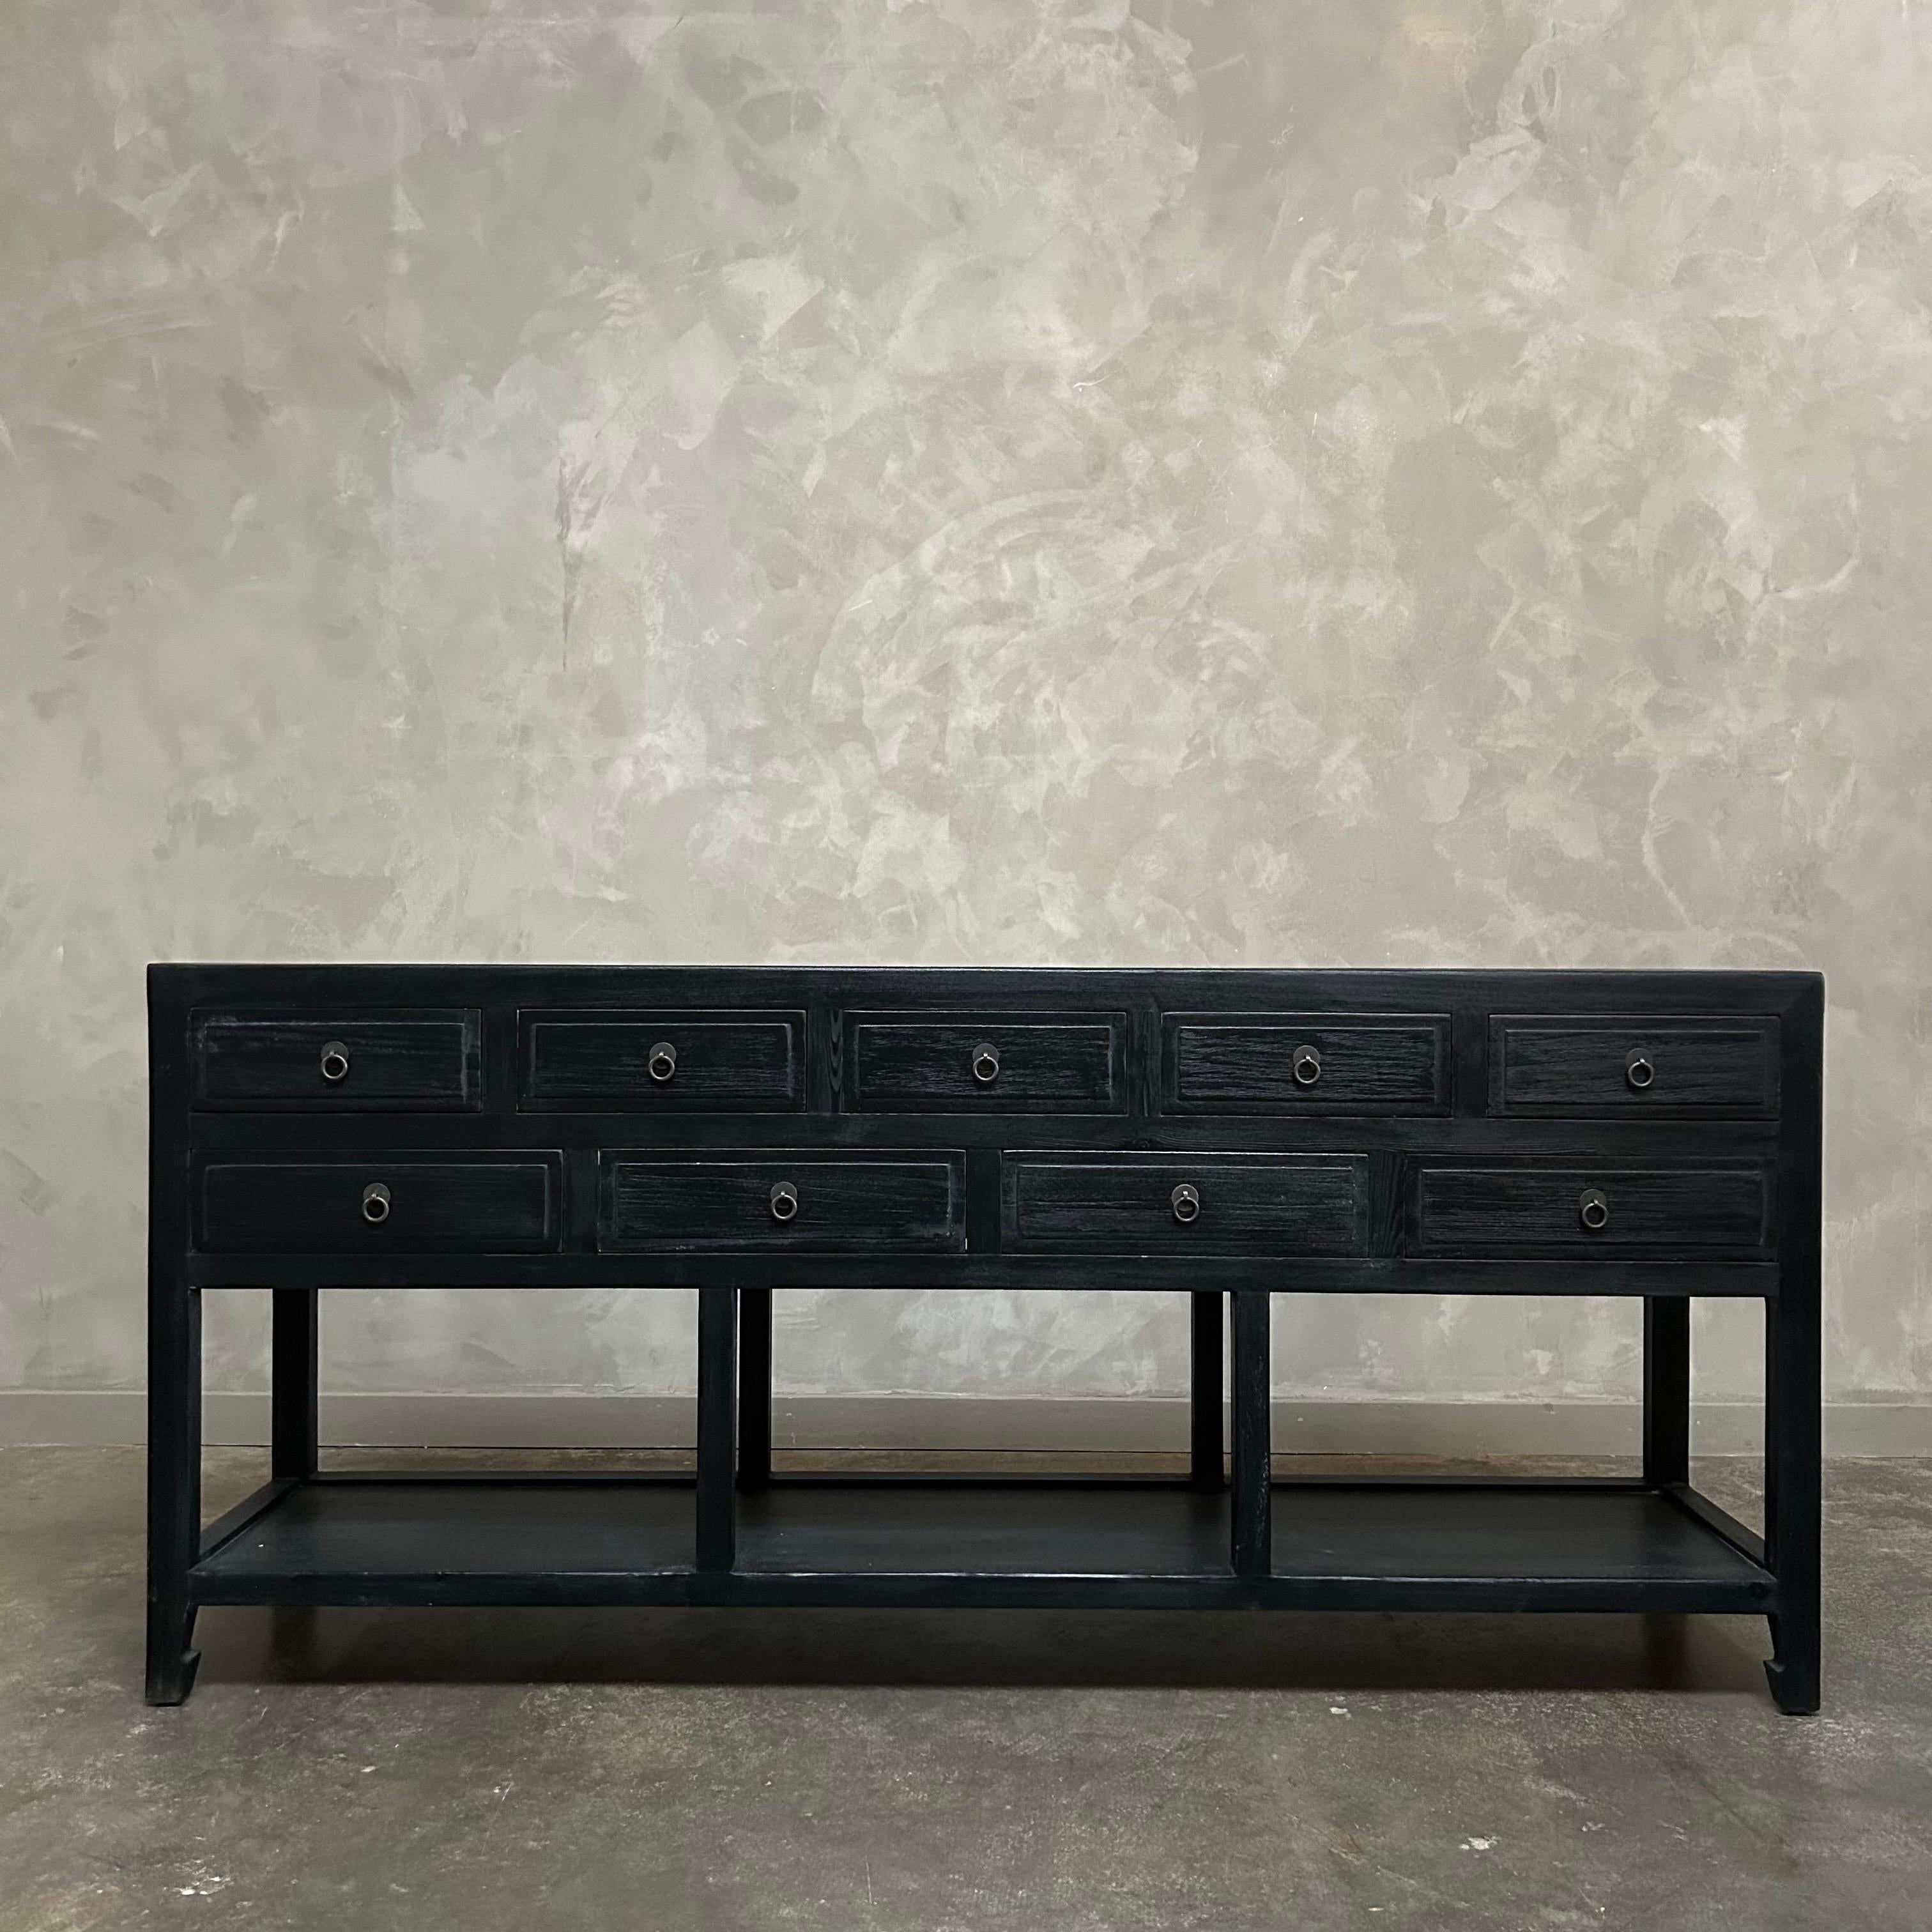 Our custom made console is a perfect blend of style and functionality.  Crafted with reclaimed wood in a black painted finish, this console will add a timeless look to any space.  With its abundance of drawers, it serves as an excellent entry piece